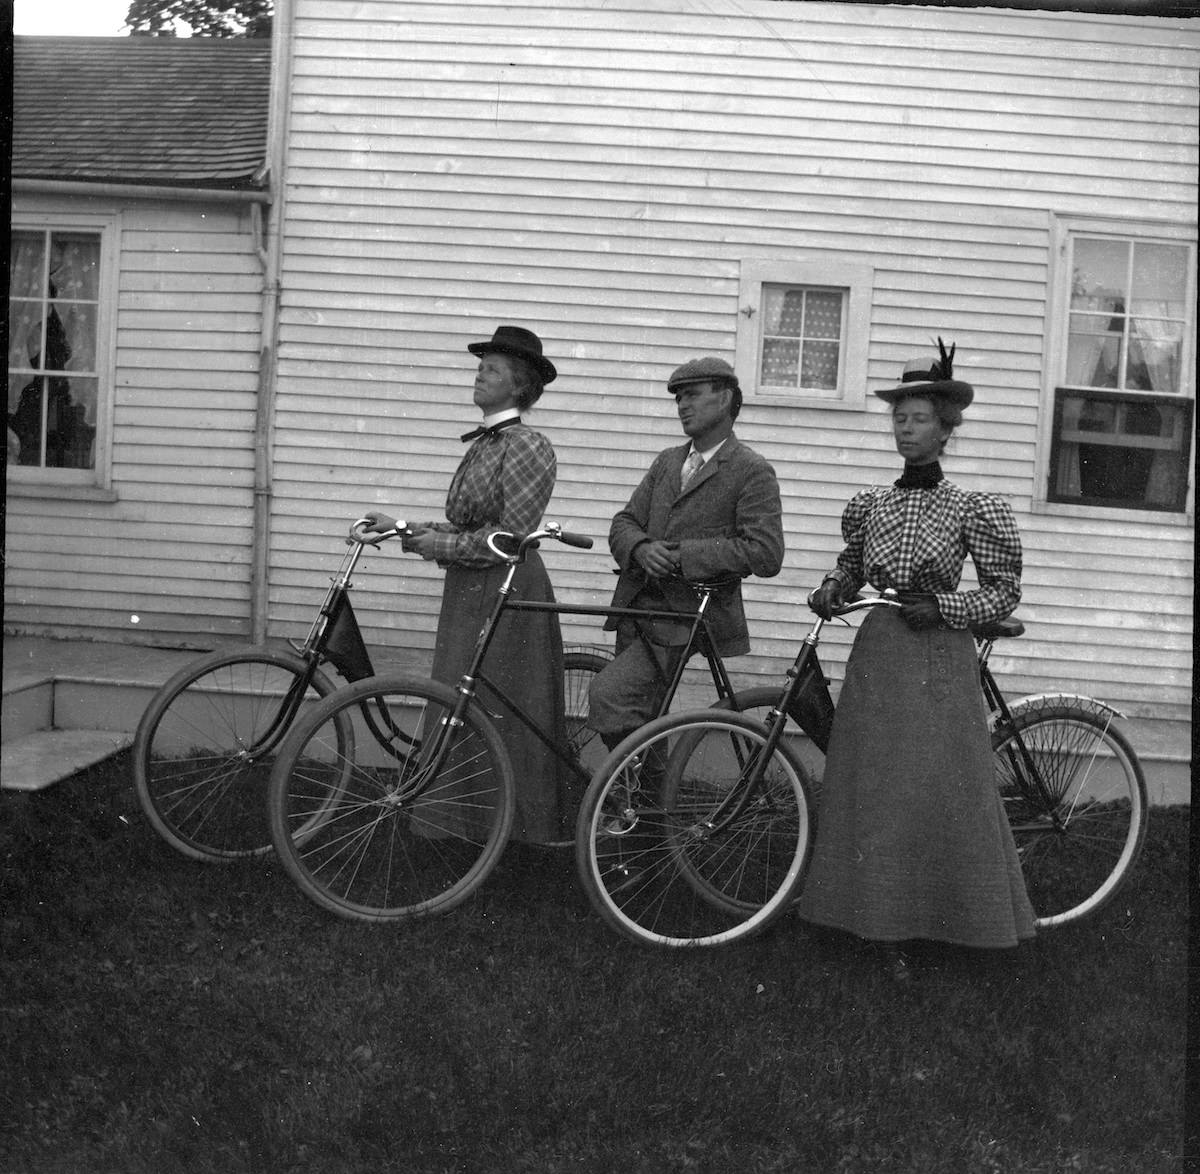 Fannie, Lillie & Harry & their bicycles. Photo is undated.